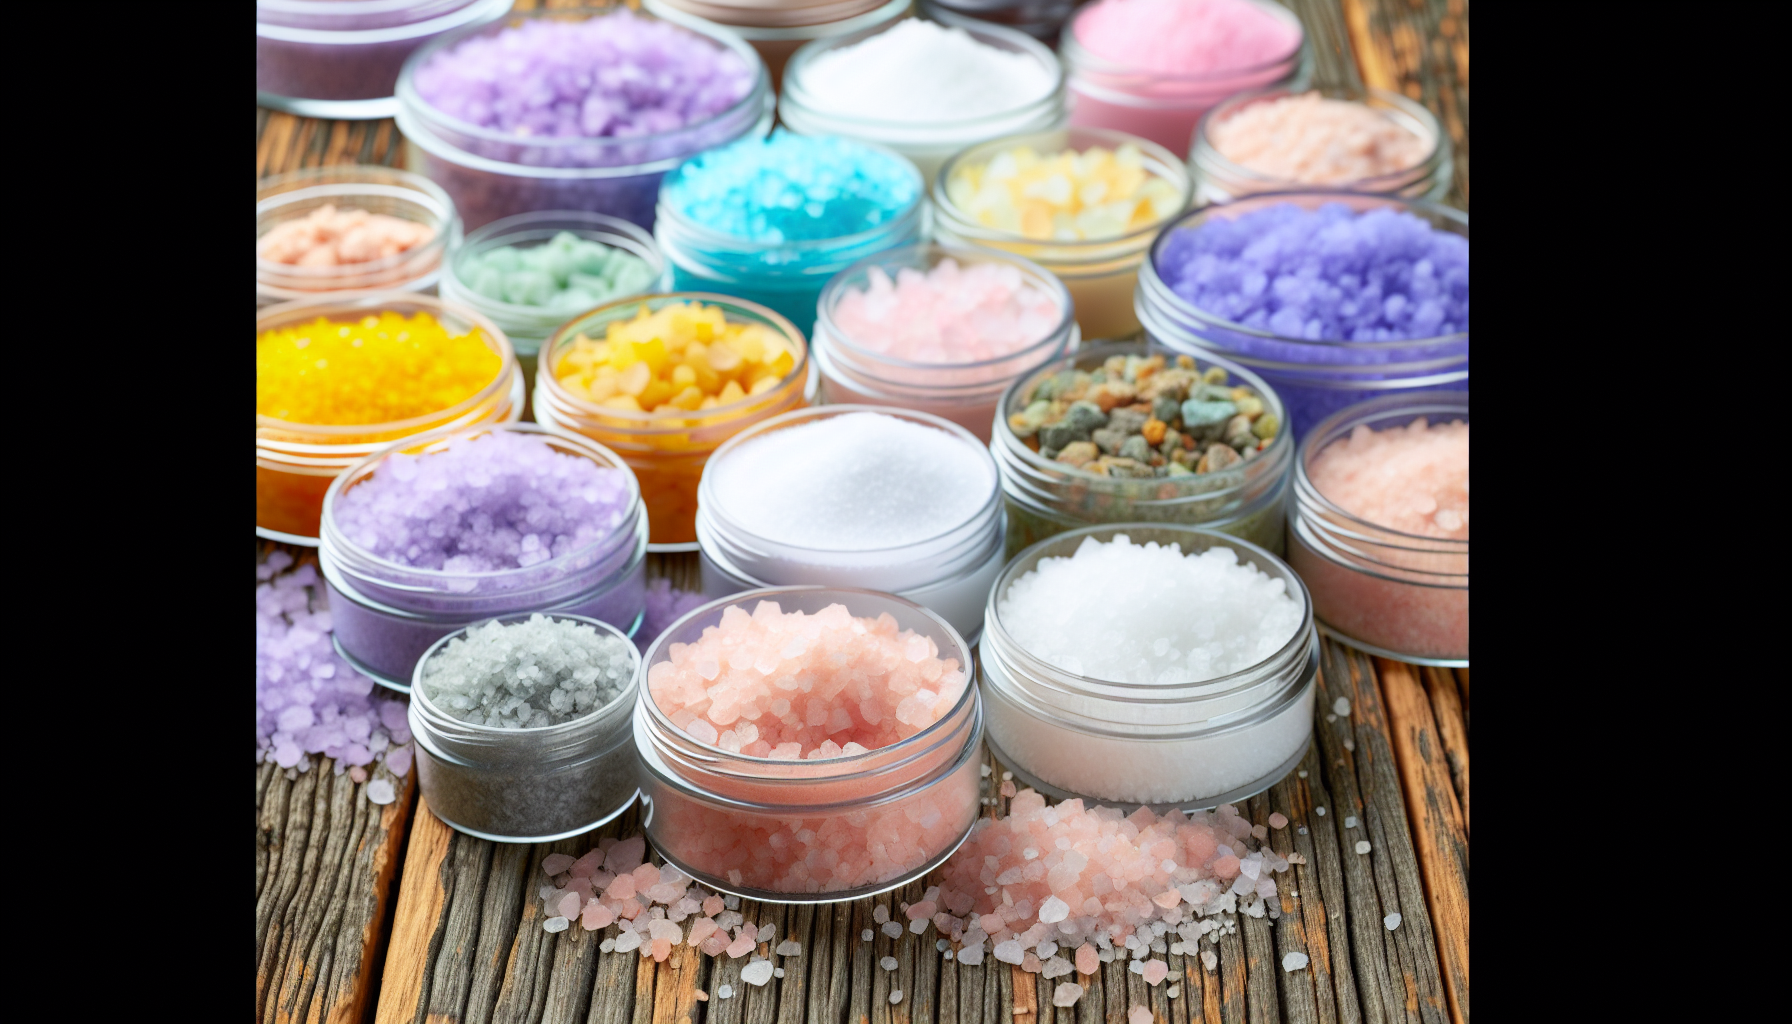 Various types of bath salts and bath soaks displayed on a wooden surface